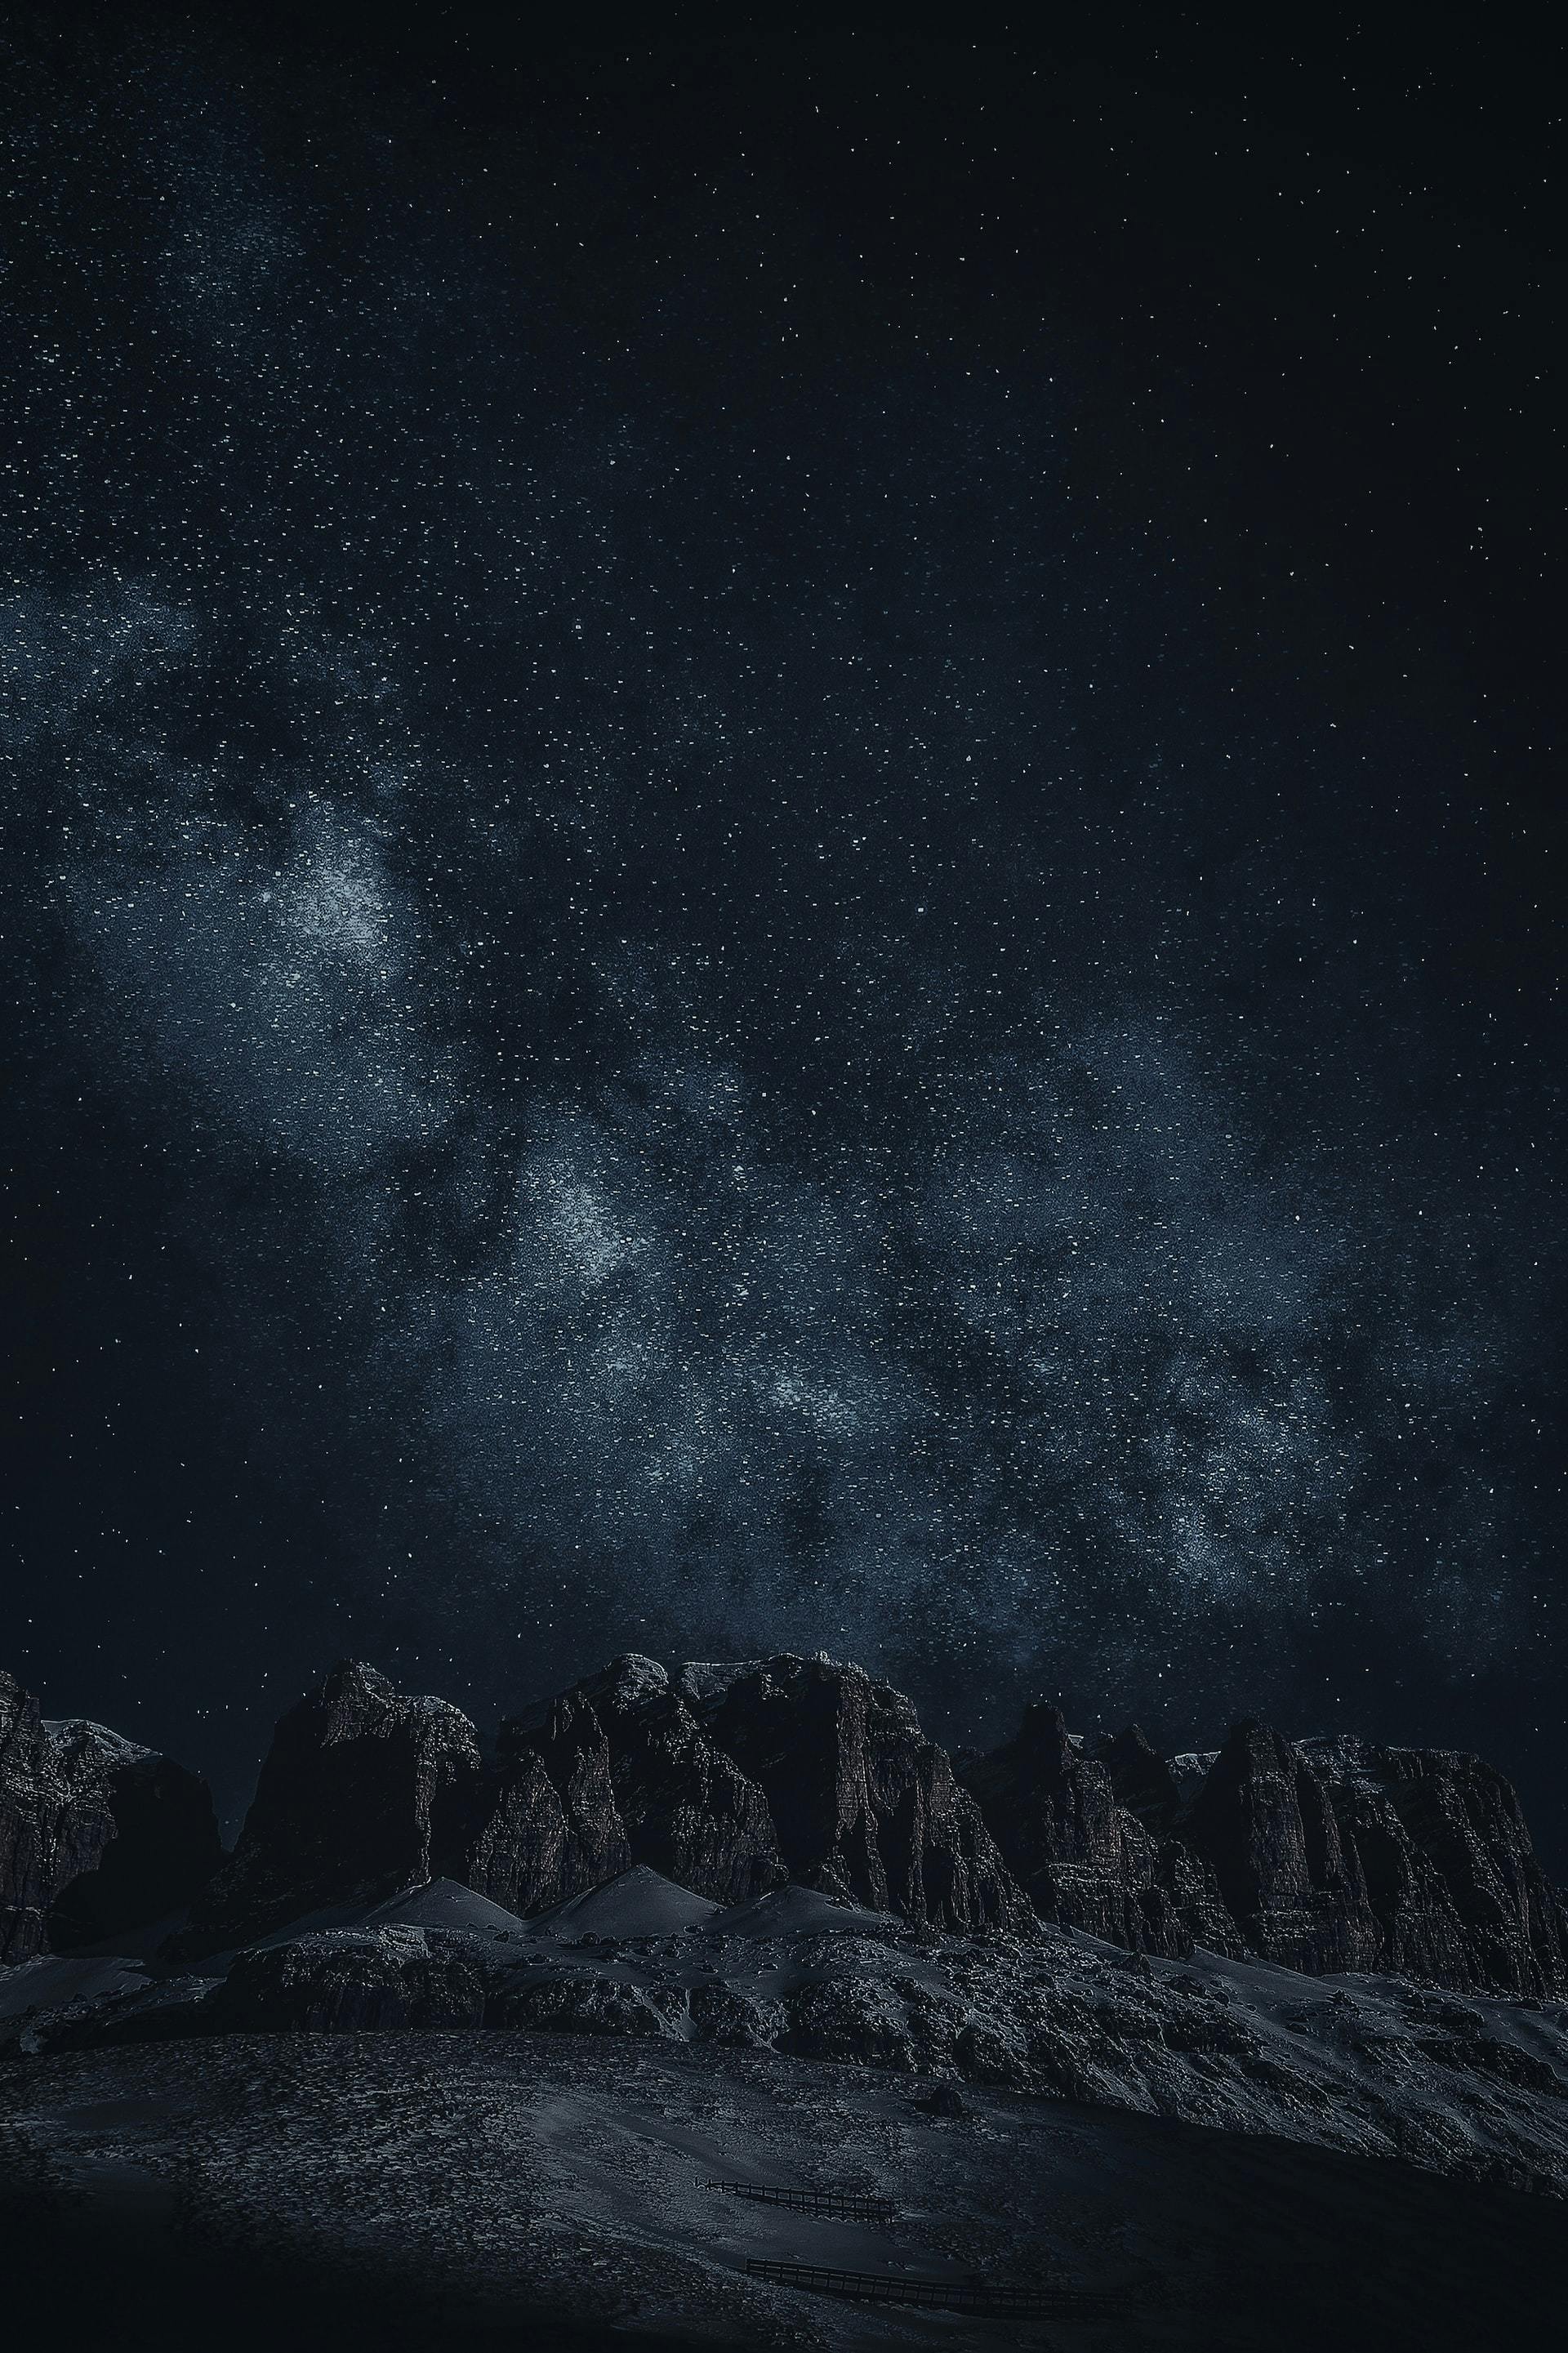 Night time shot of mountains with stars above.